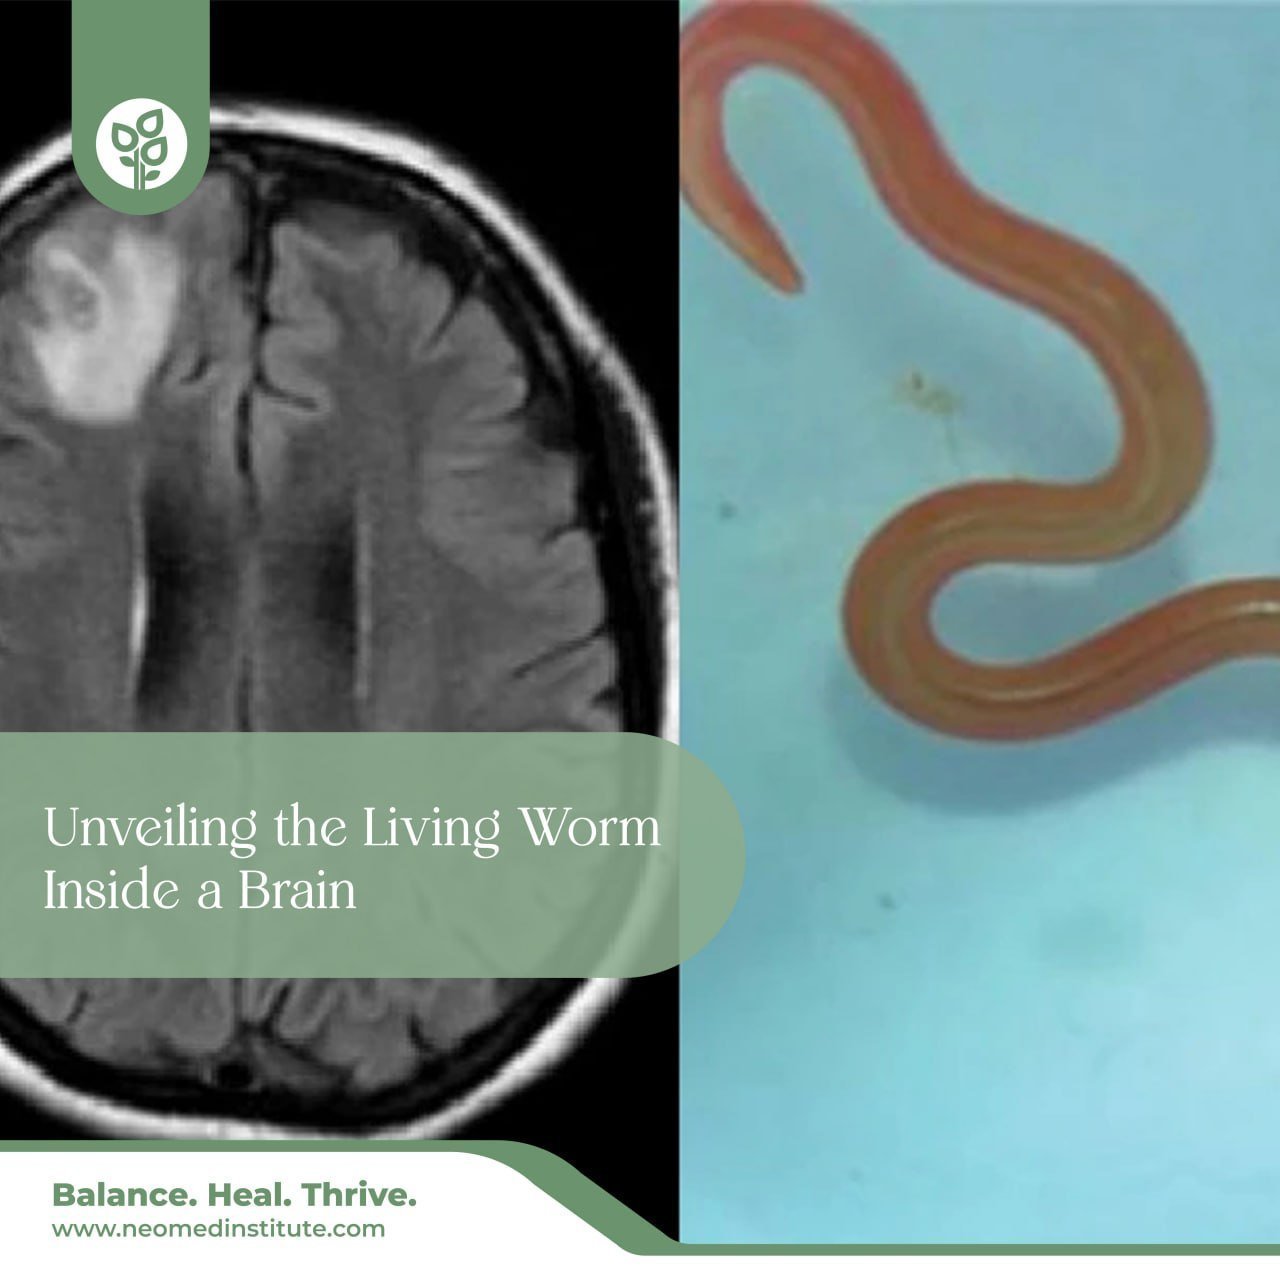 Unveiling the Living Worm Inside a Brain